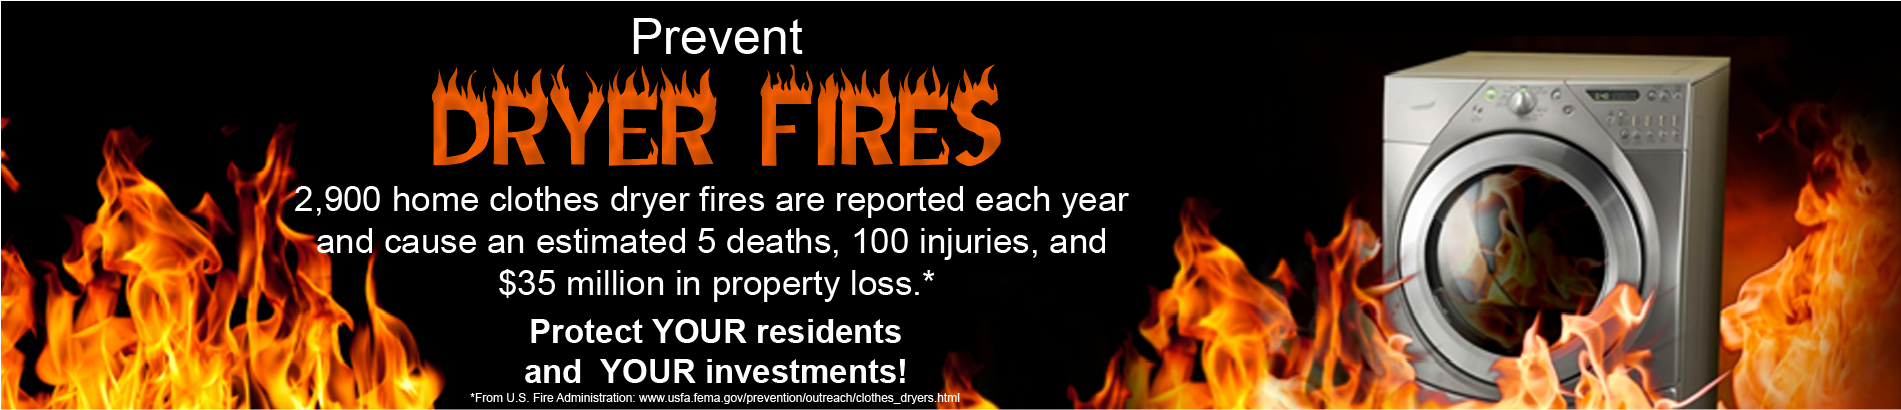 Prevent Dryer Fires! 2900 home clothes dryer fires are reported each year and cause and estimated 5 deaths, 100 injuries, and $35 million in property loss.